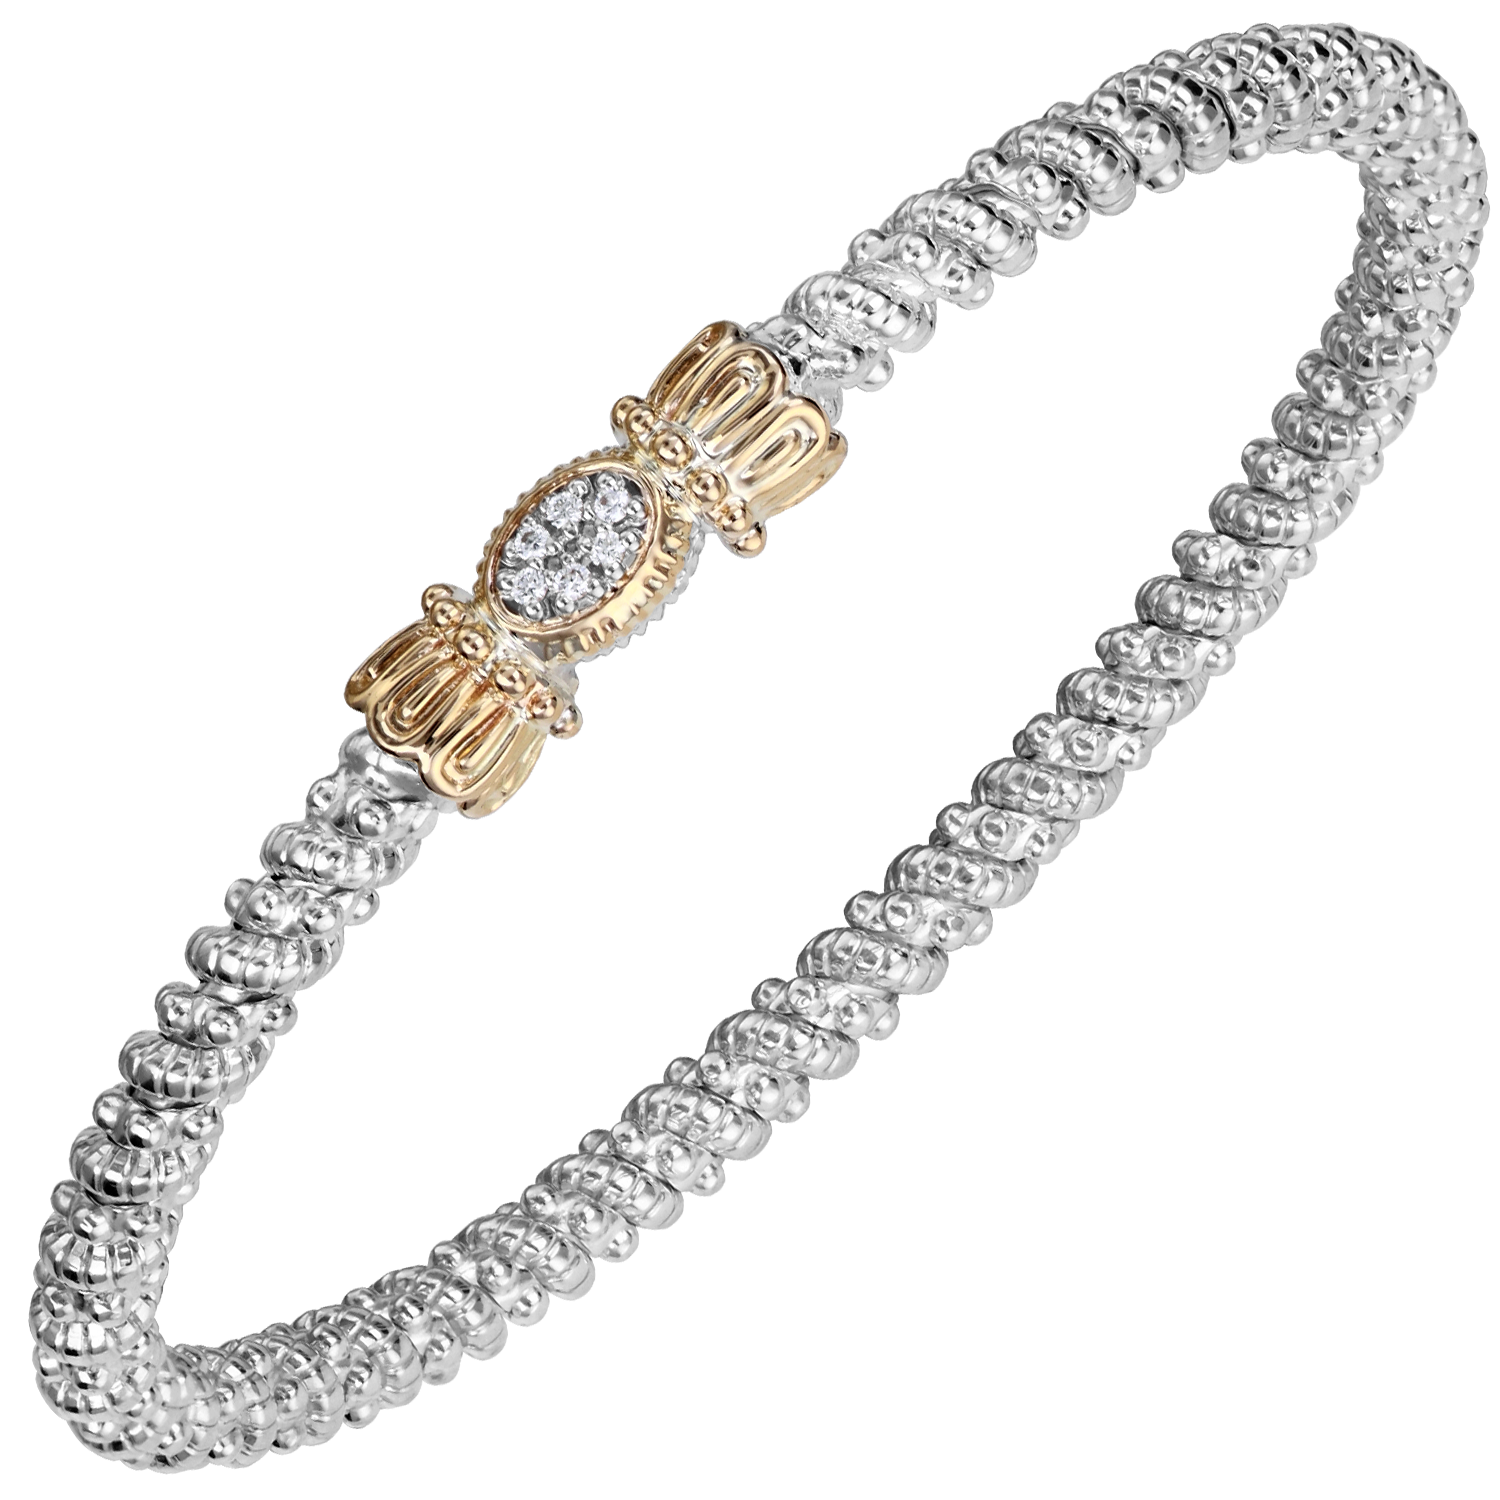 Vahan Sterling Silver & Yellow Gold Diamond Bracelet Galloway and Moseley, Inc. Sumter, SC